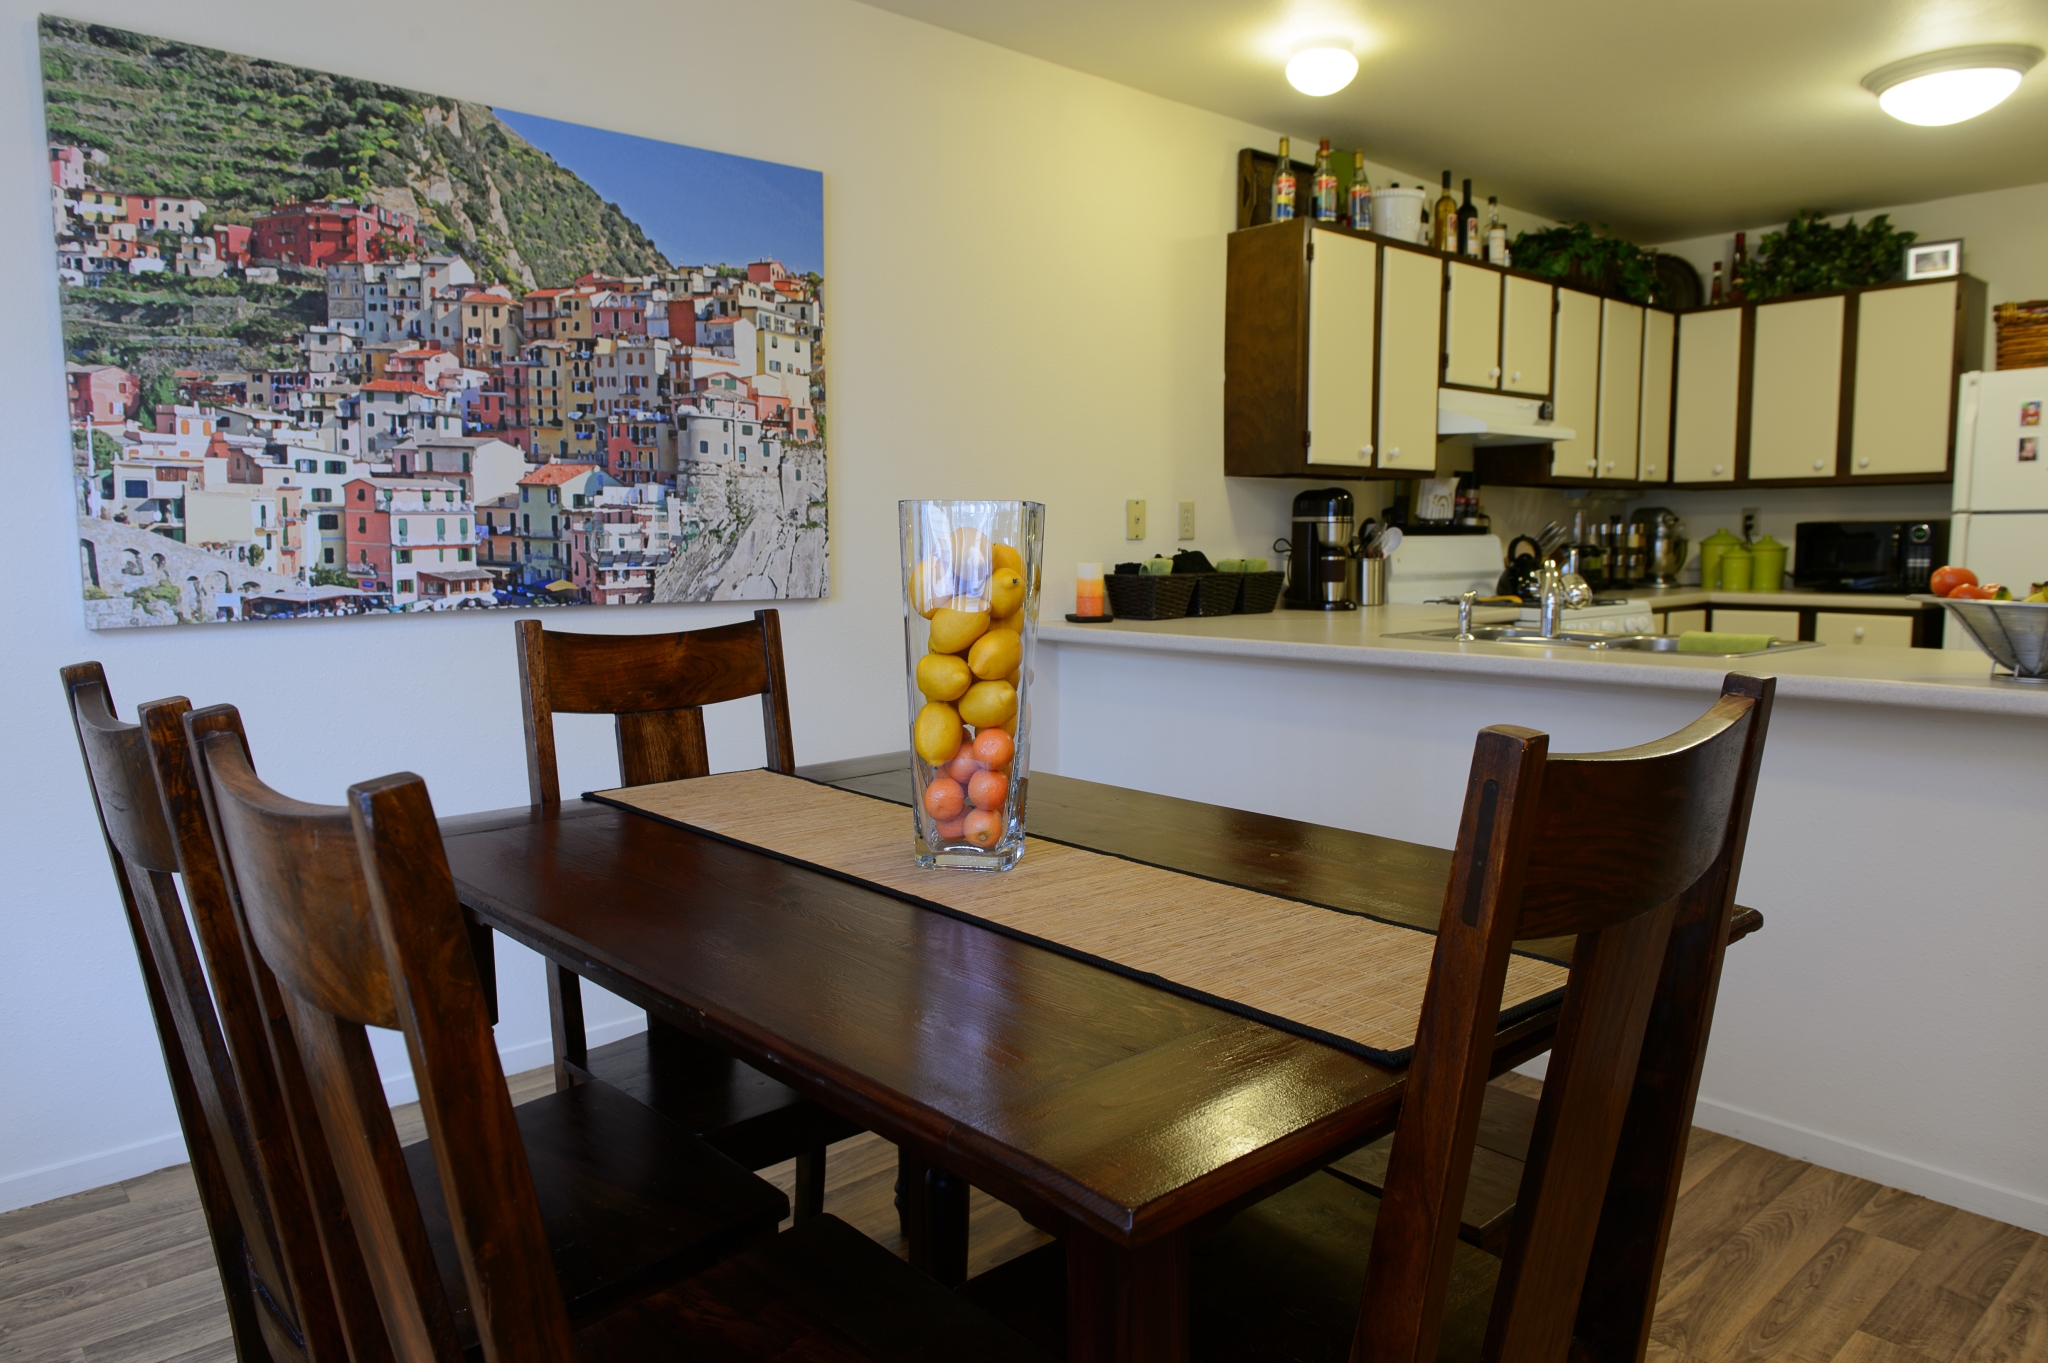 Dining Area and Kitchen | Apartment Rentals Watertown NY